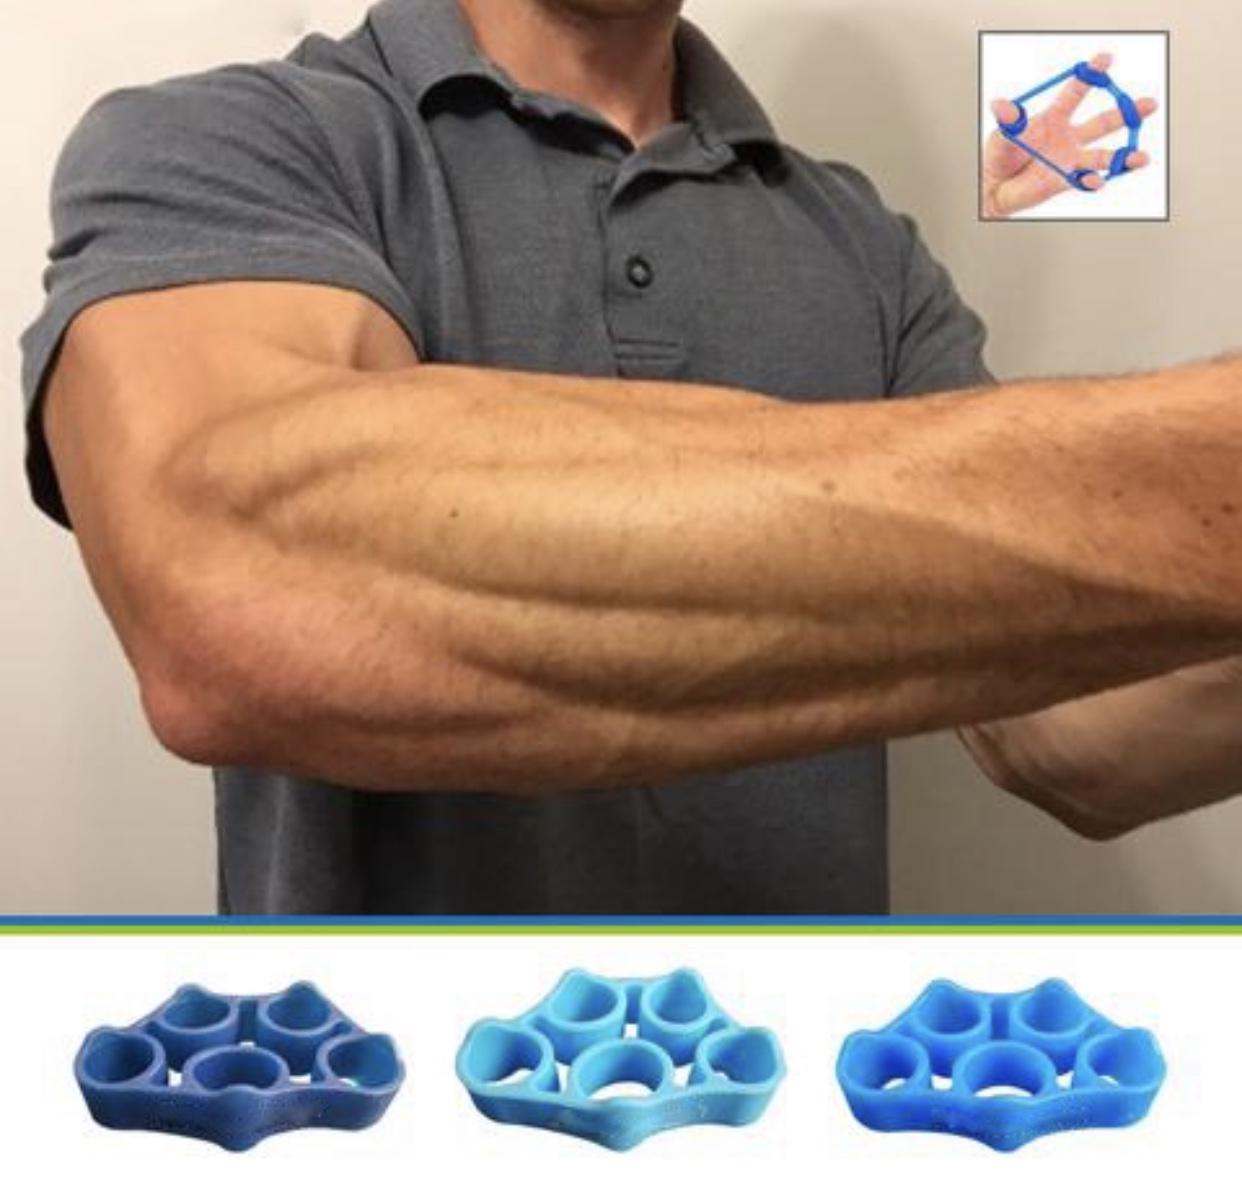 3x BlueFinger  Exerciser Strengthener Wrist Forearm Grip Trainer Resistance Band Burnyourcalories Does Not Apply